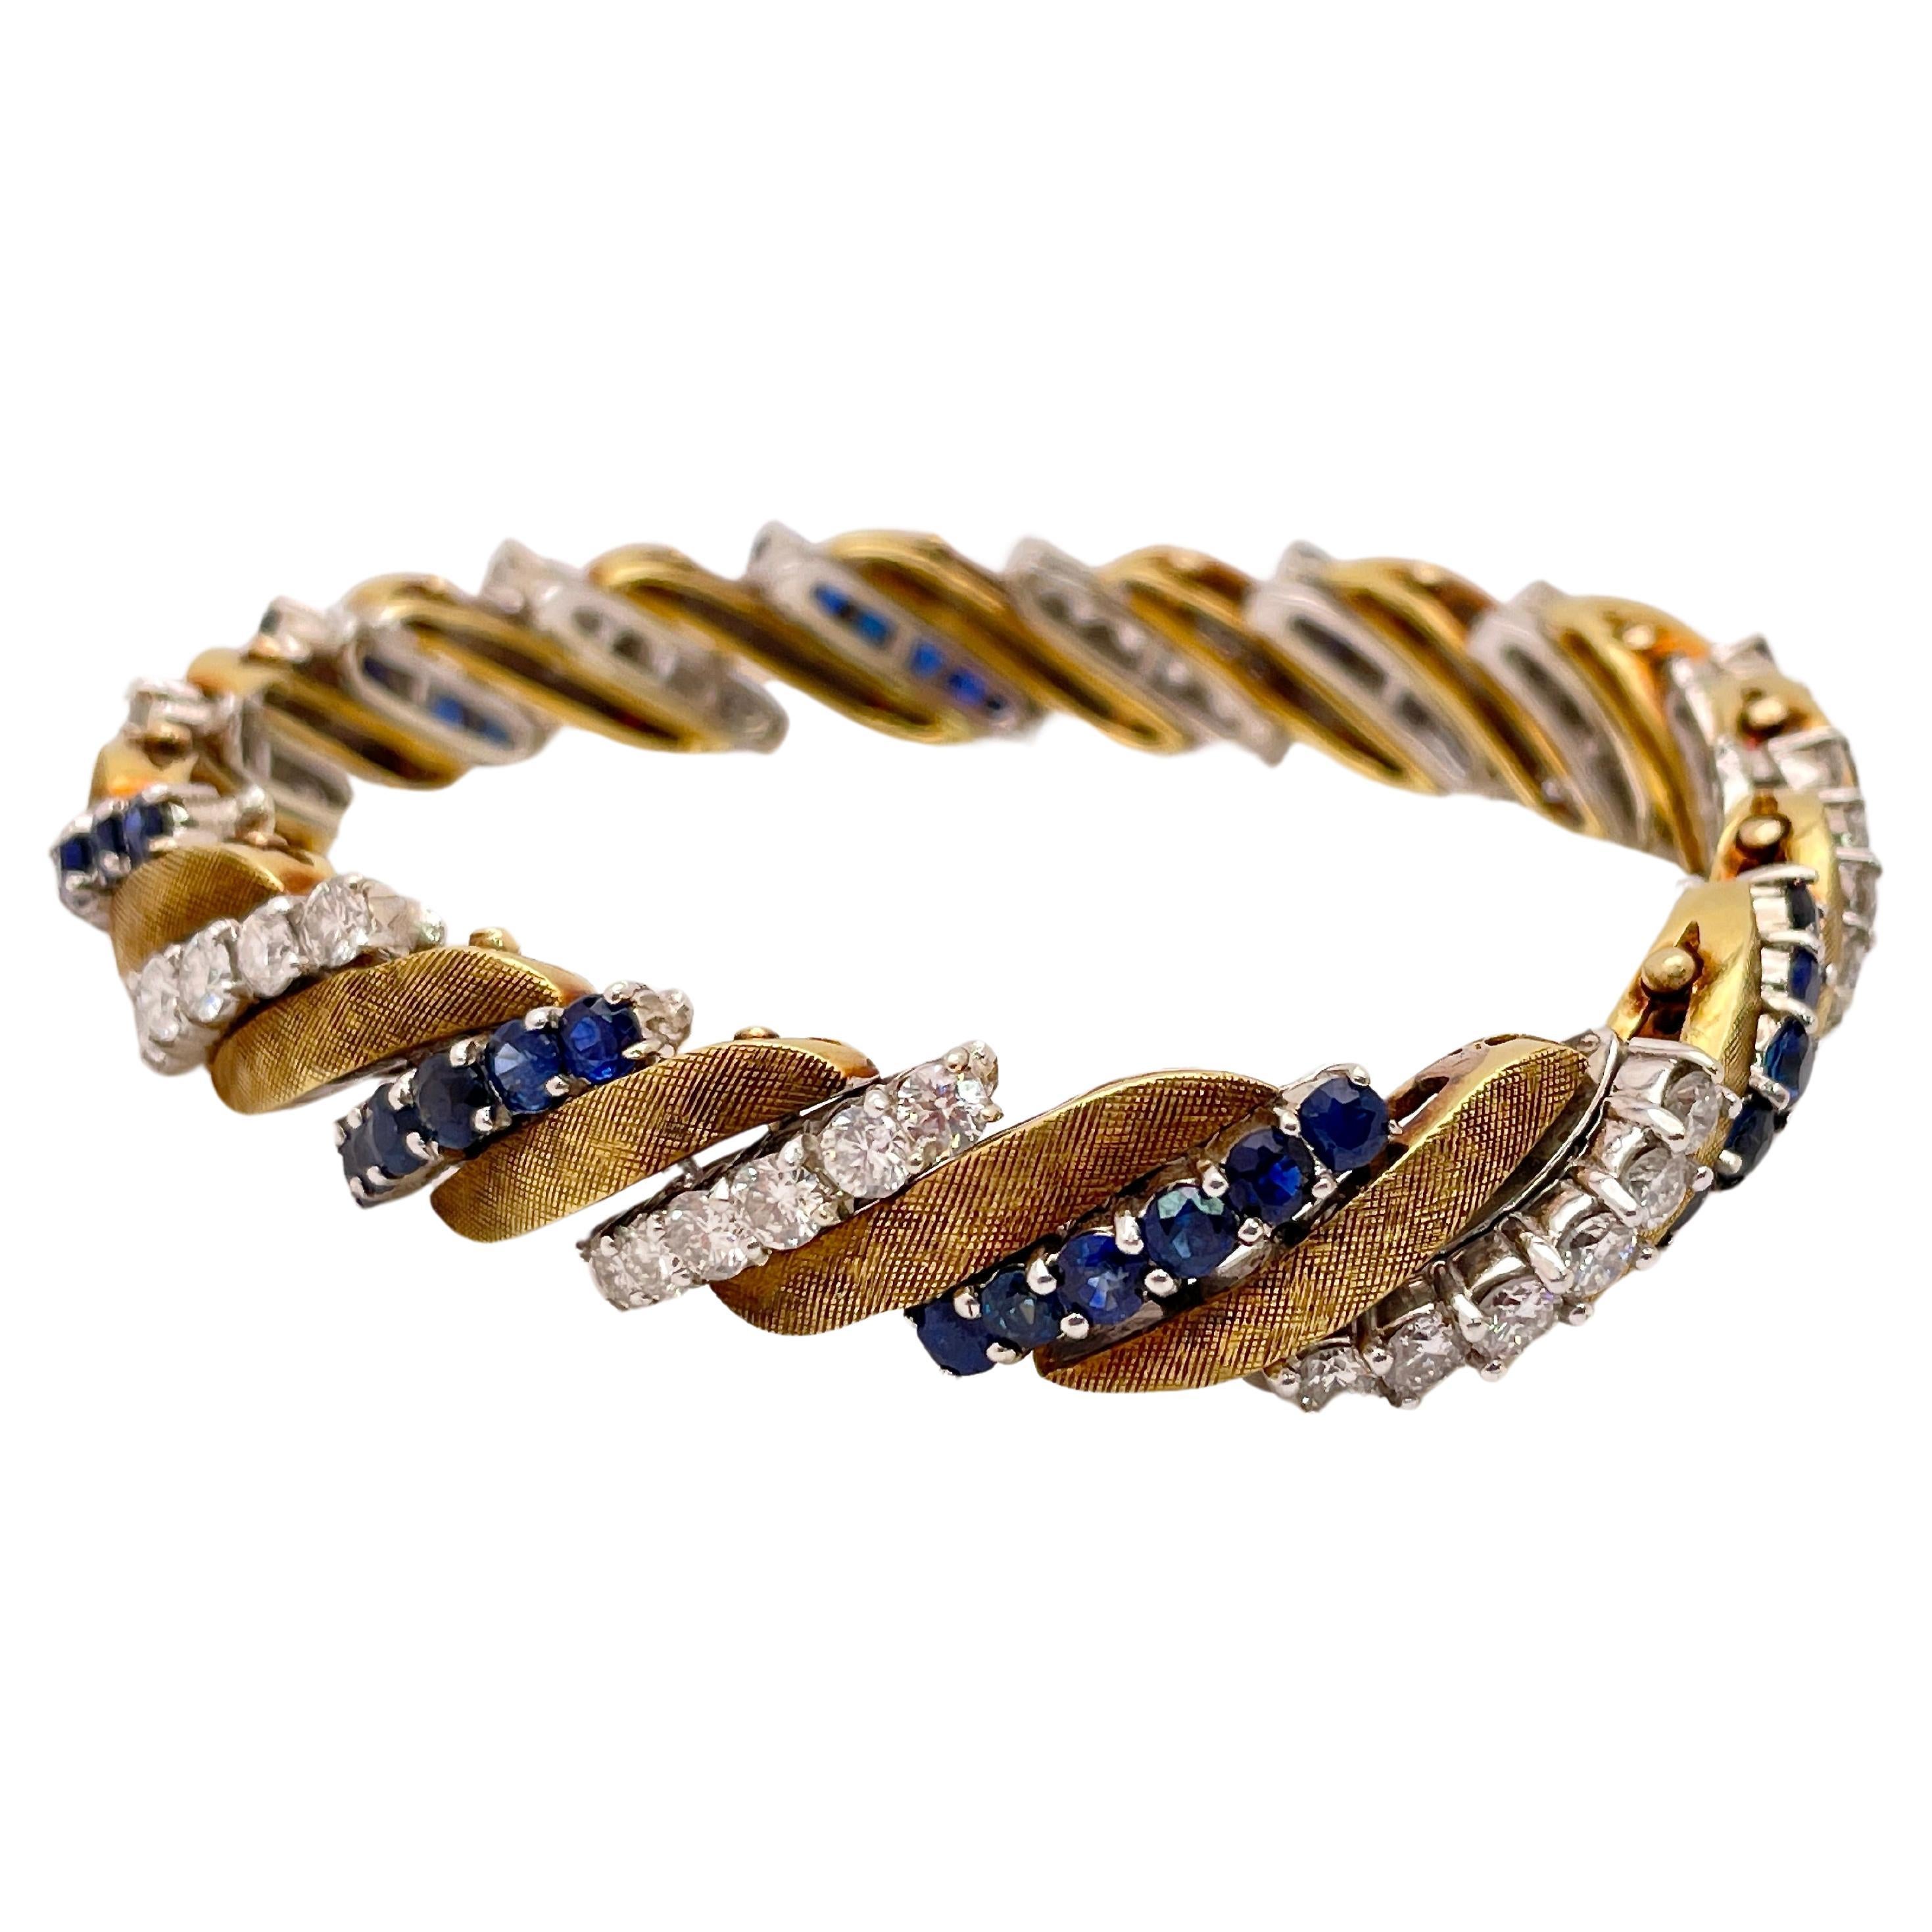 6 CT Diamond and Sapphire Yellow and White Gold Link Bracelet